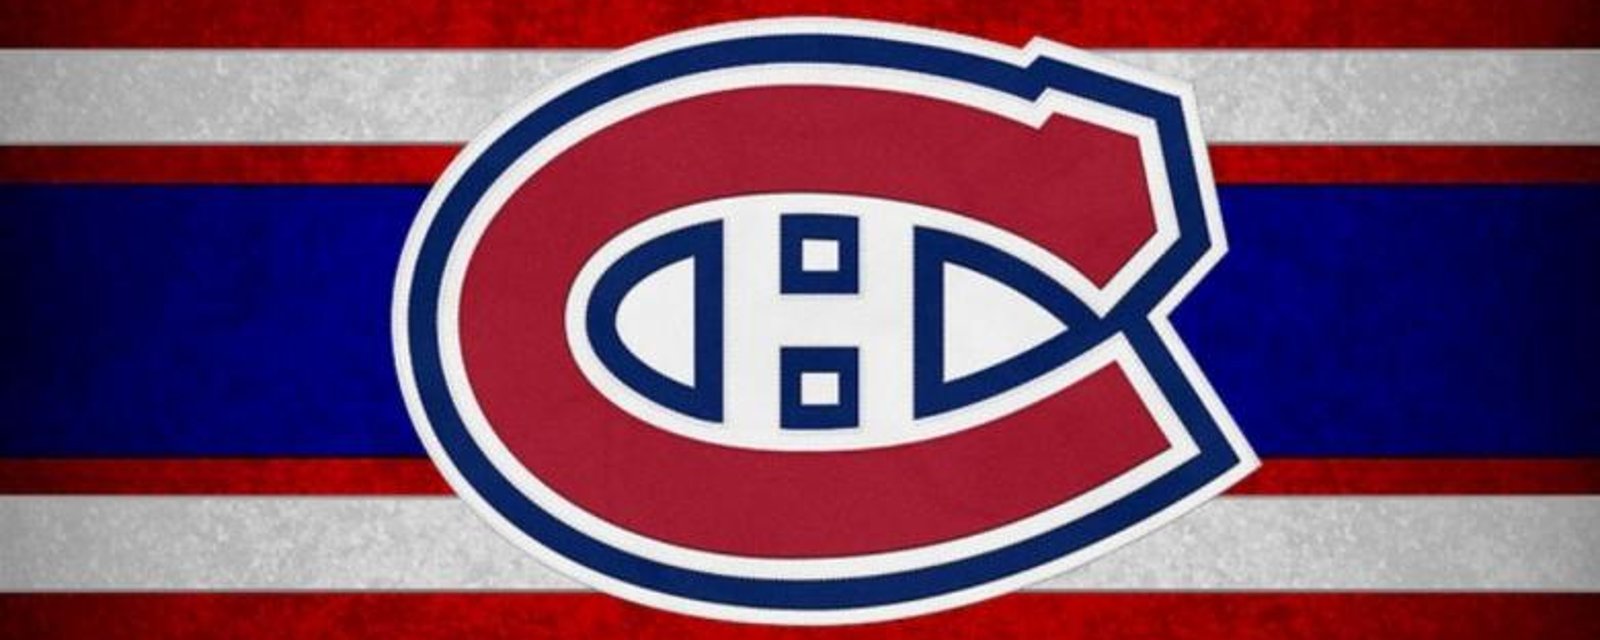 Former Canadiens star says he's willing to make a comeback to help team.